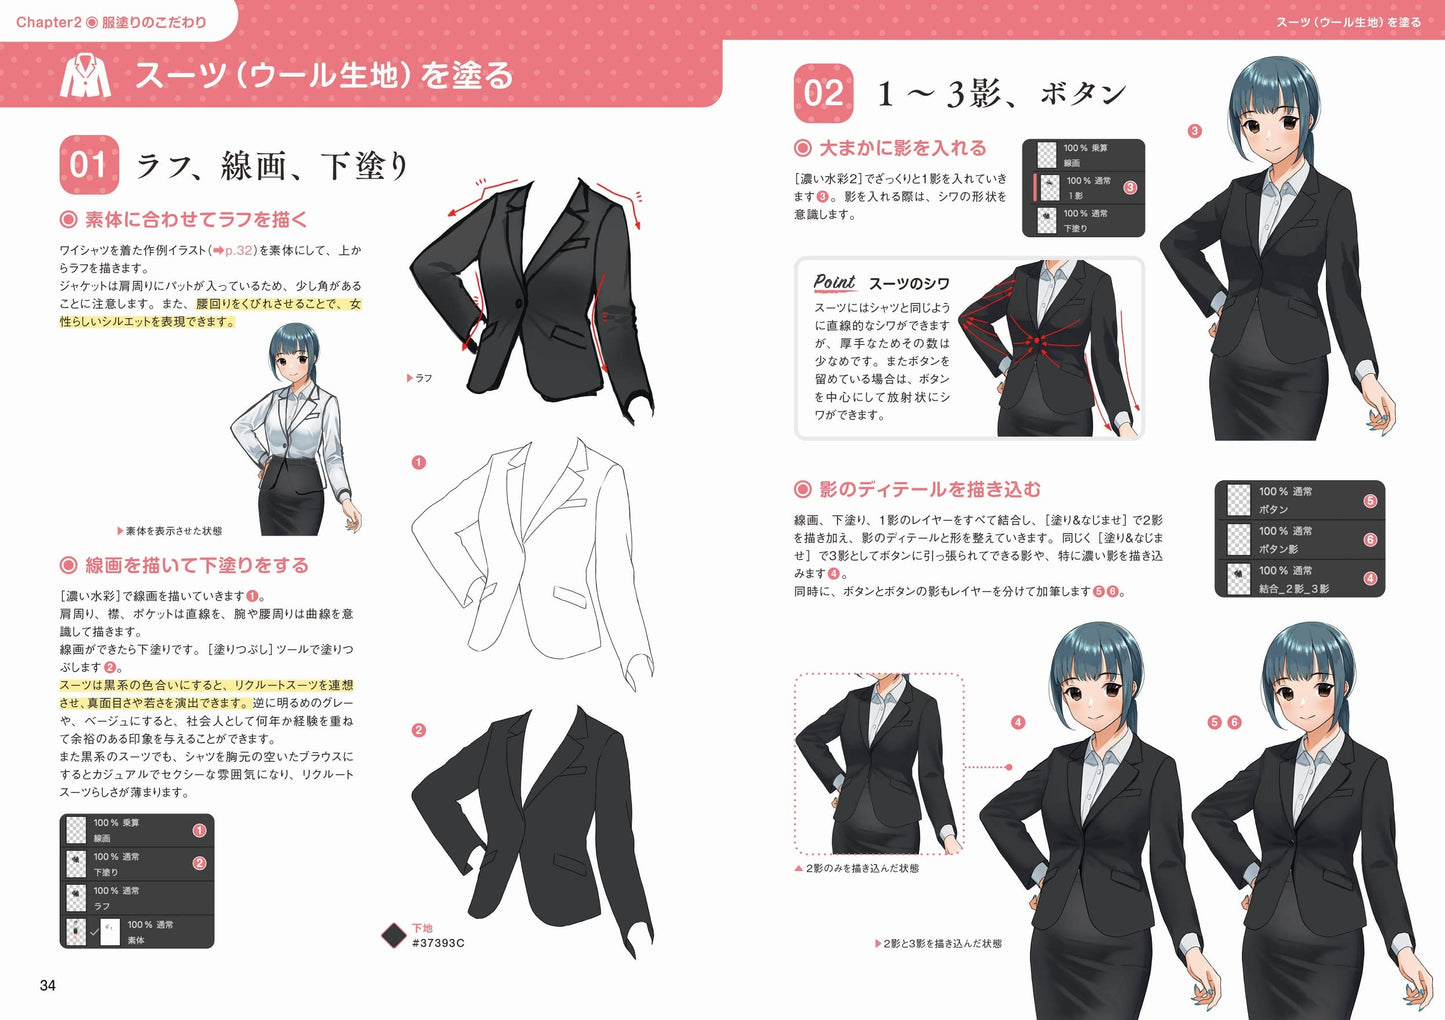 Doshima Seriously Teaches How To Paint "Clothes"